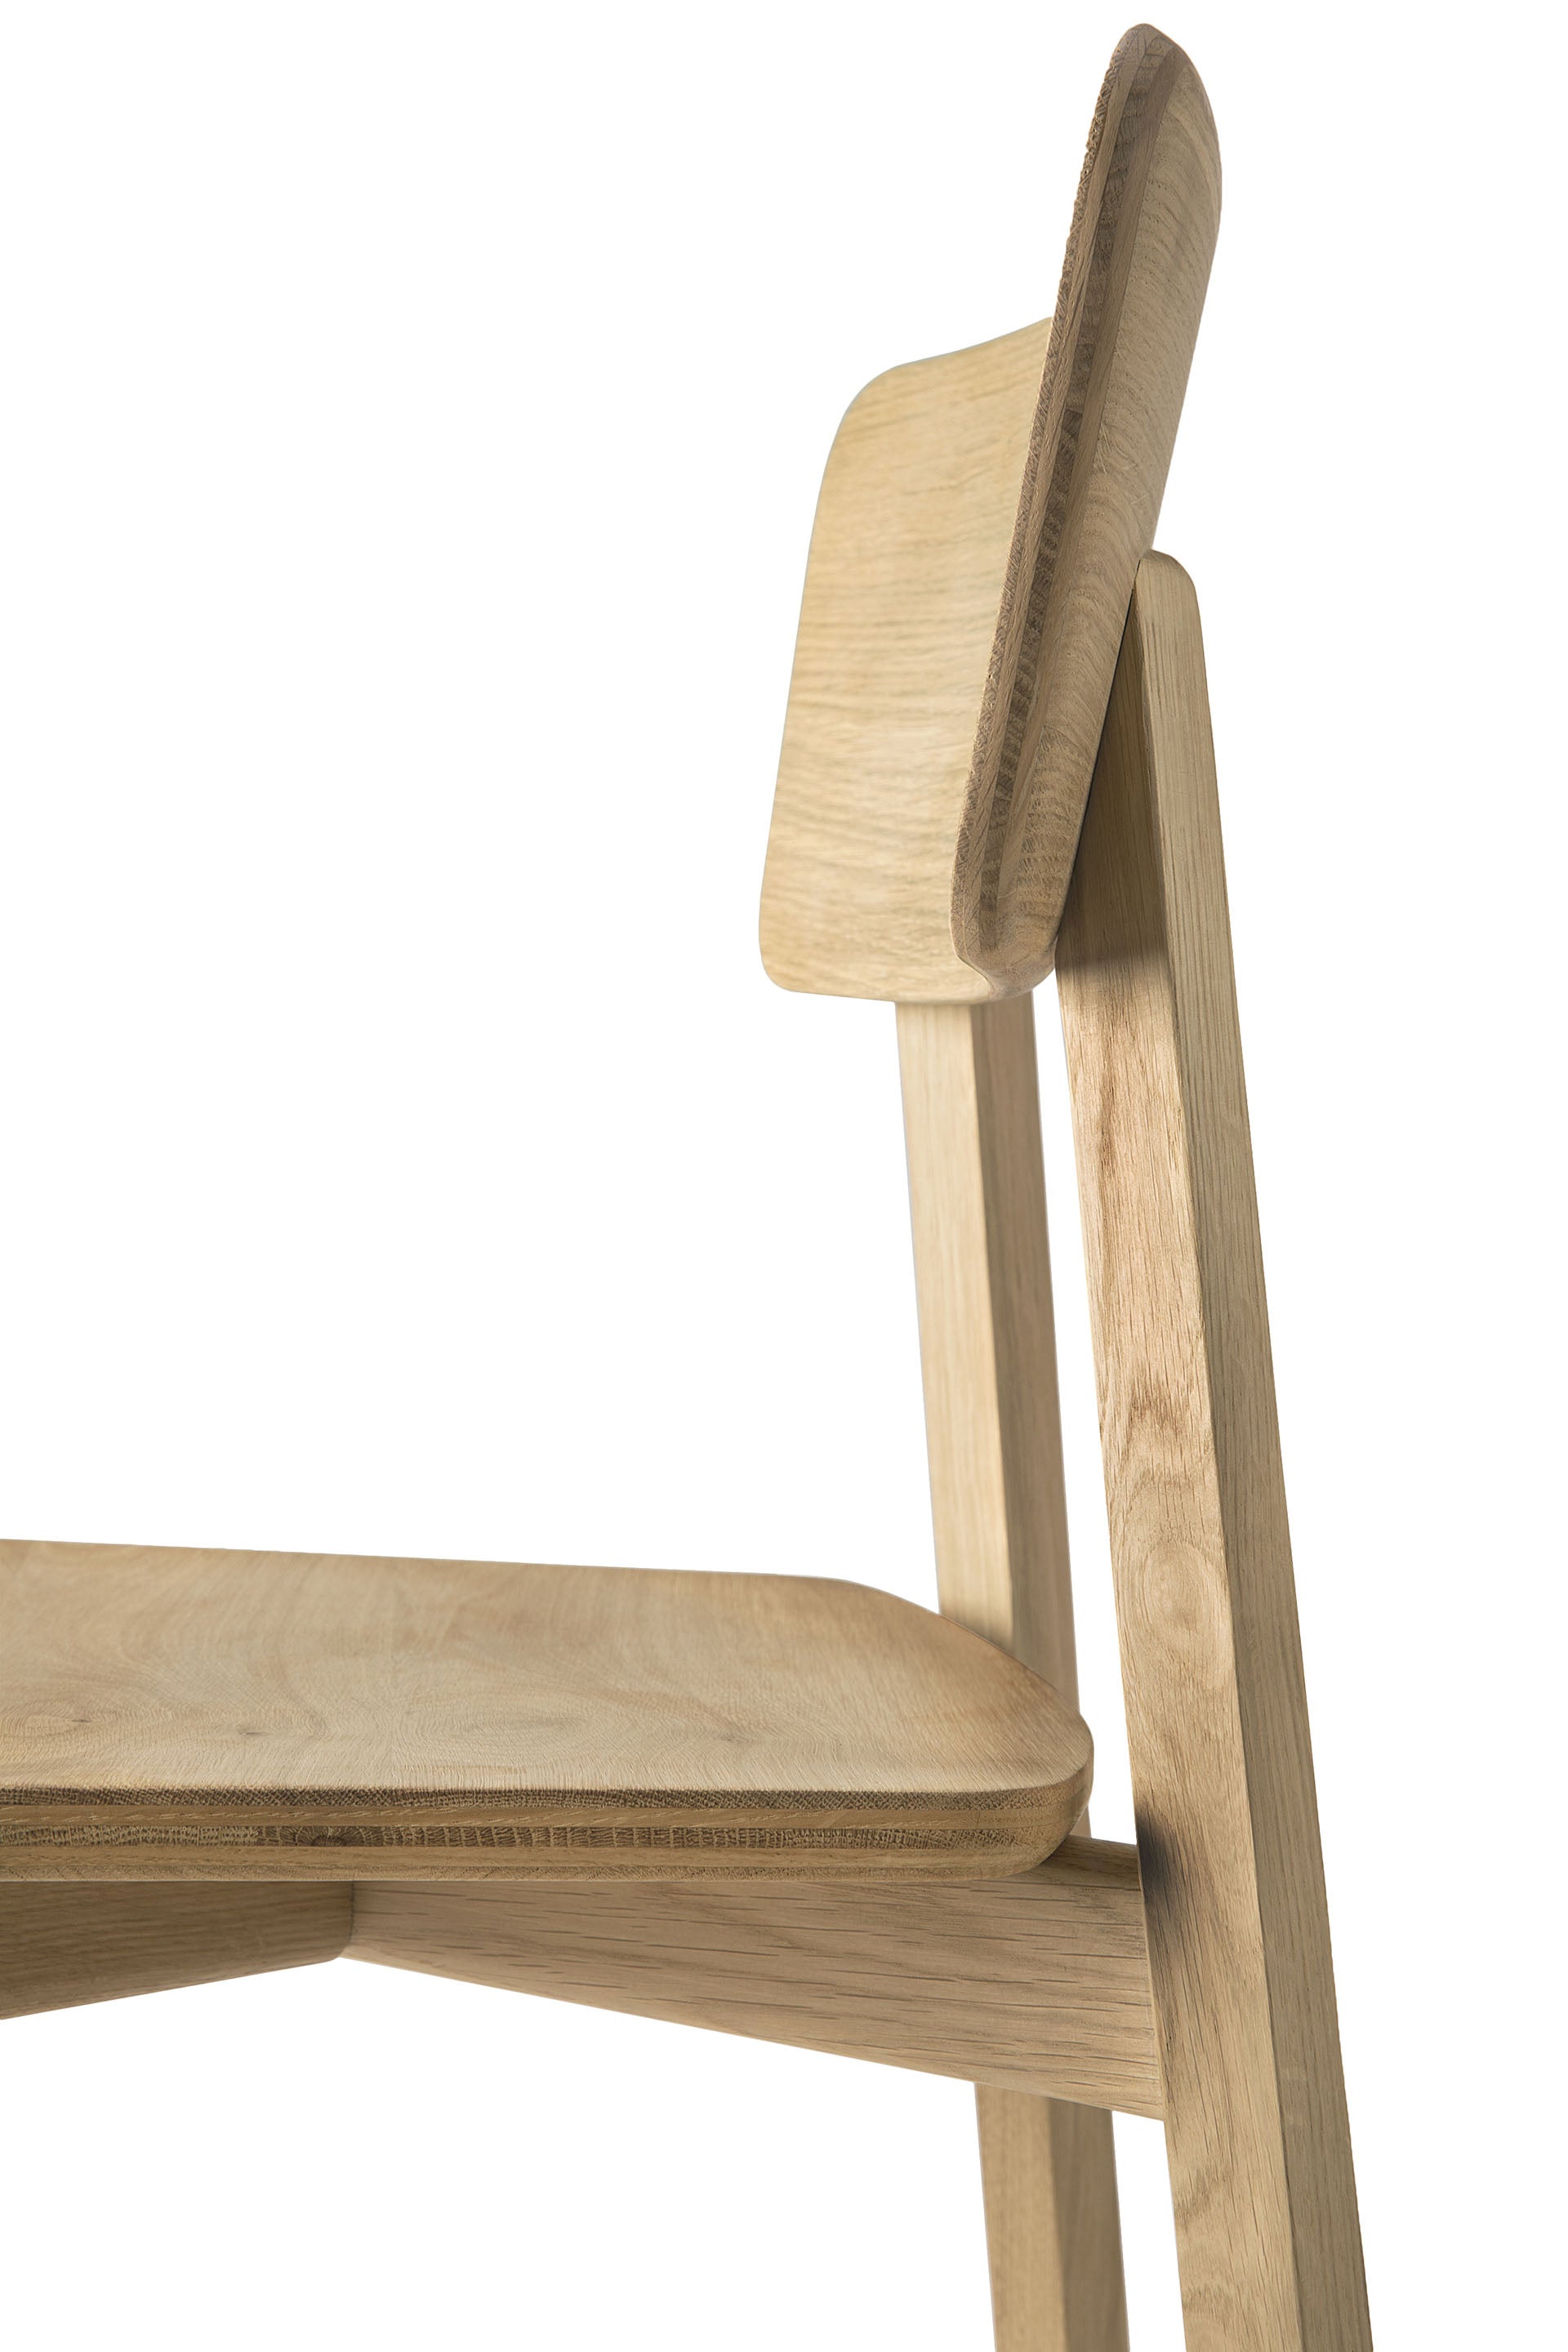 Ethnicraft Oak Casale Dining Chair is available from Make Your House A Home, Bendigo, Victoria, Australia